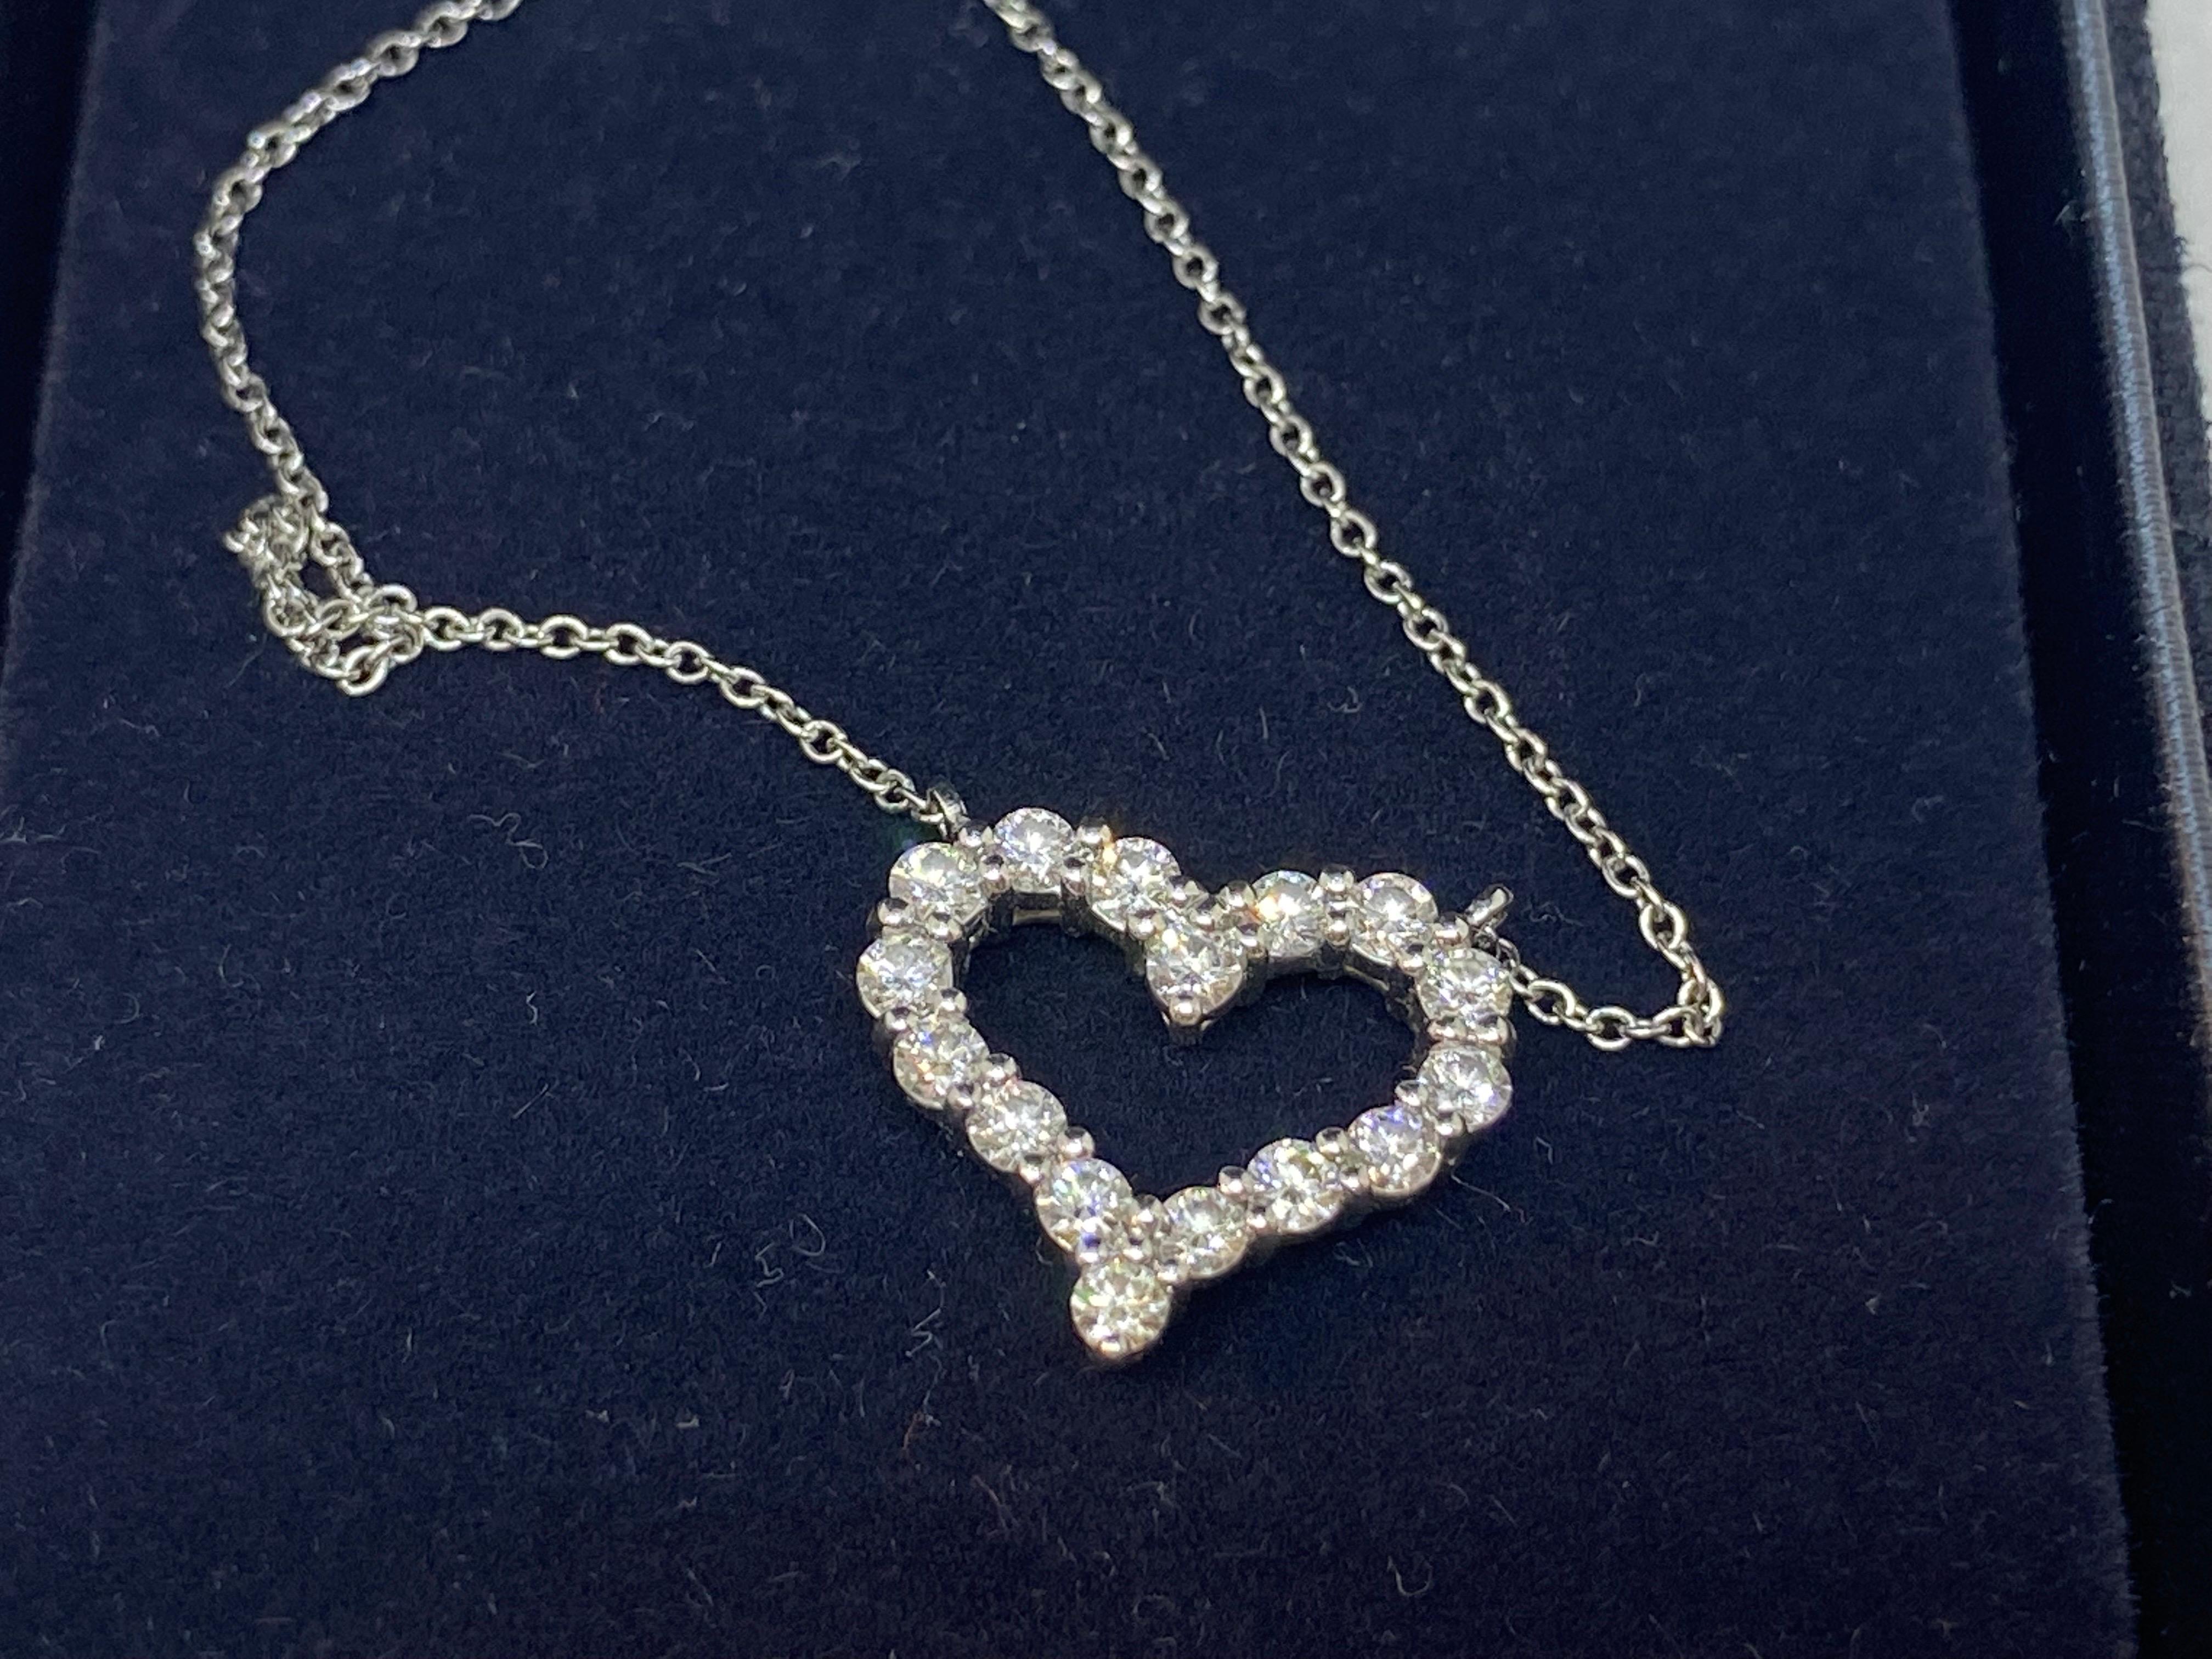 Tiffany & Co heart necklace in Platinum 950 and diamonds, 0.54 ct, comes with original Tiffany & Co box and case.

Weight: 8.2 grams
Size (heart): 12.4 x 15.6 mm
Total Chain Length: 15.75 inches/40 cm
